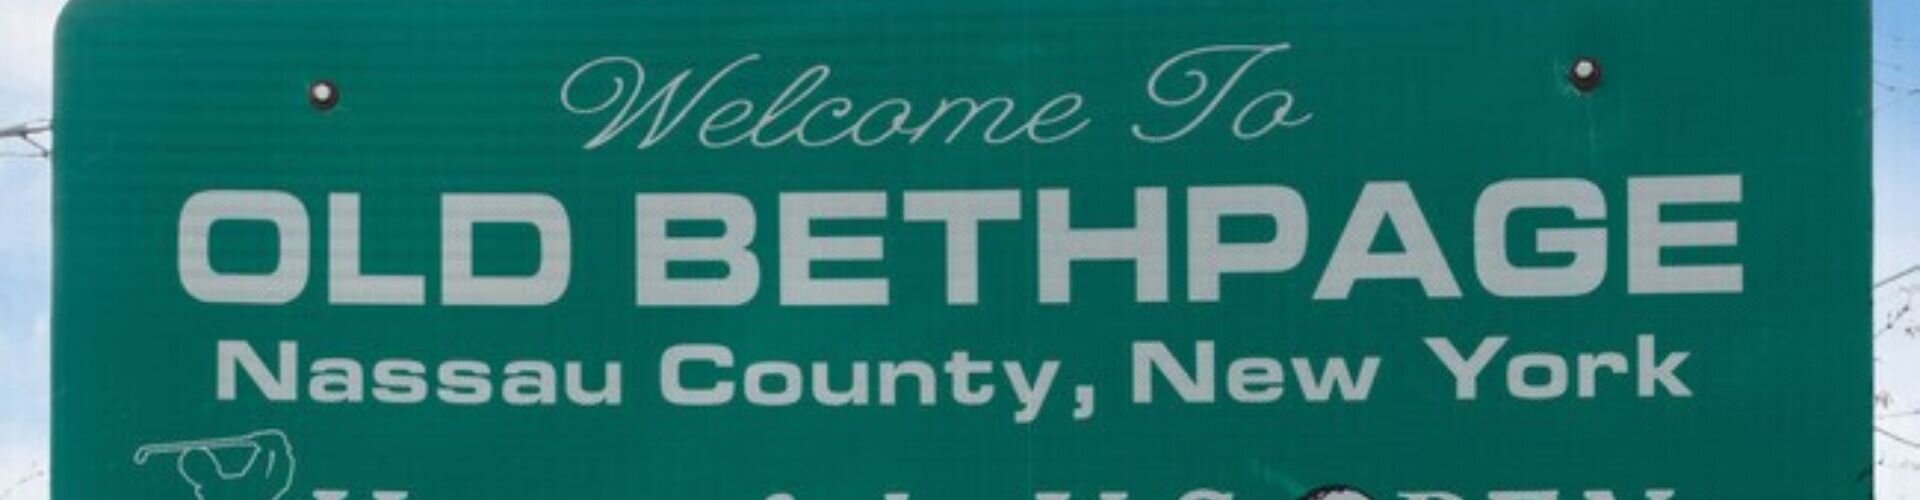 Old Bethpage - Cash Buyers in Long Island